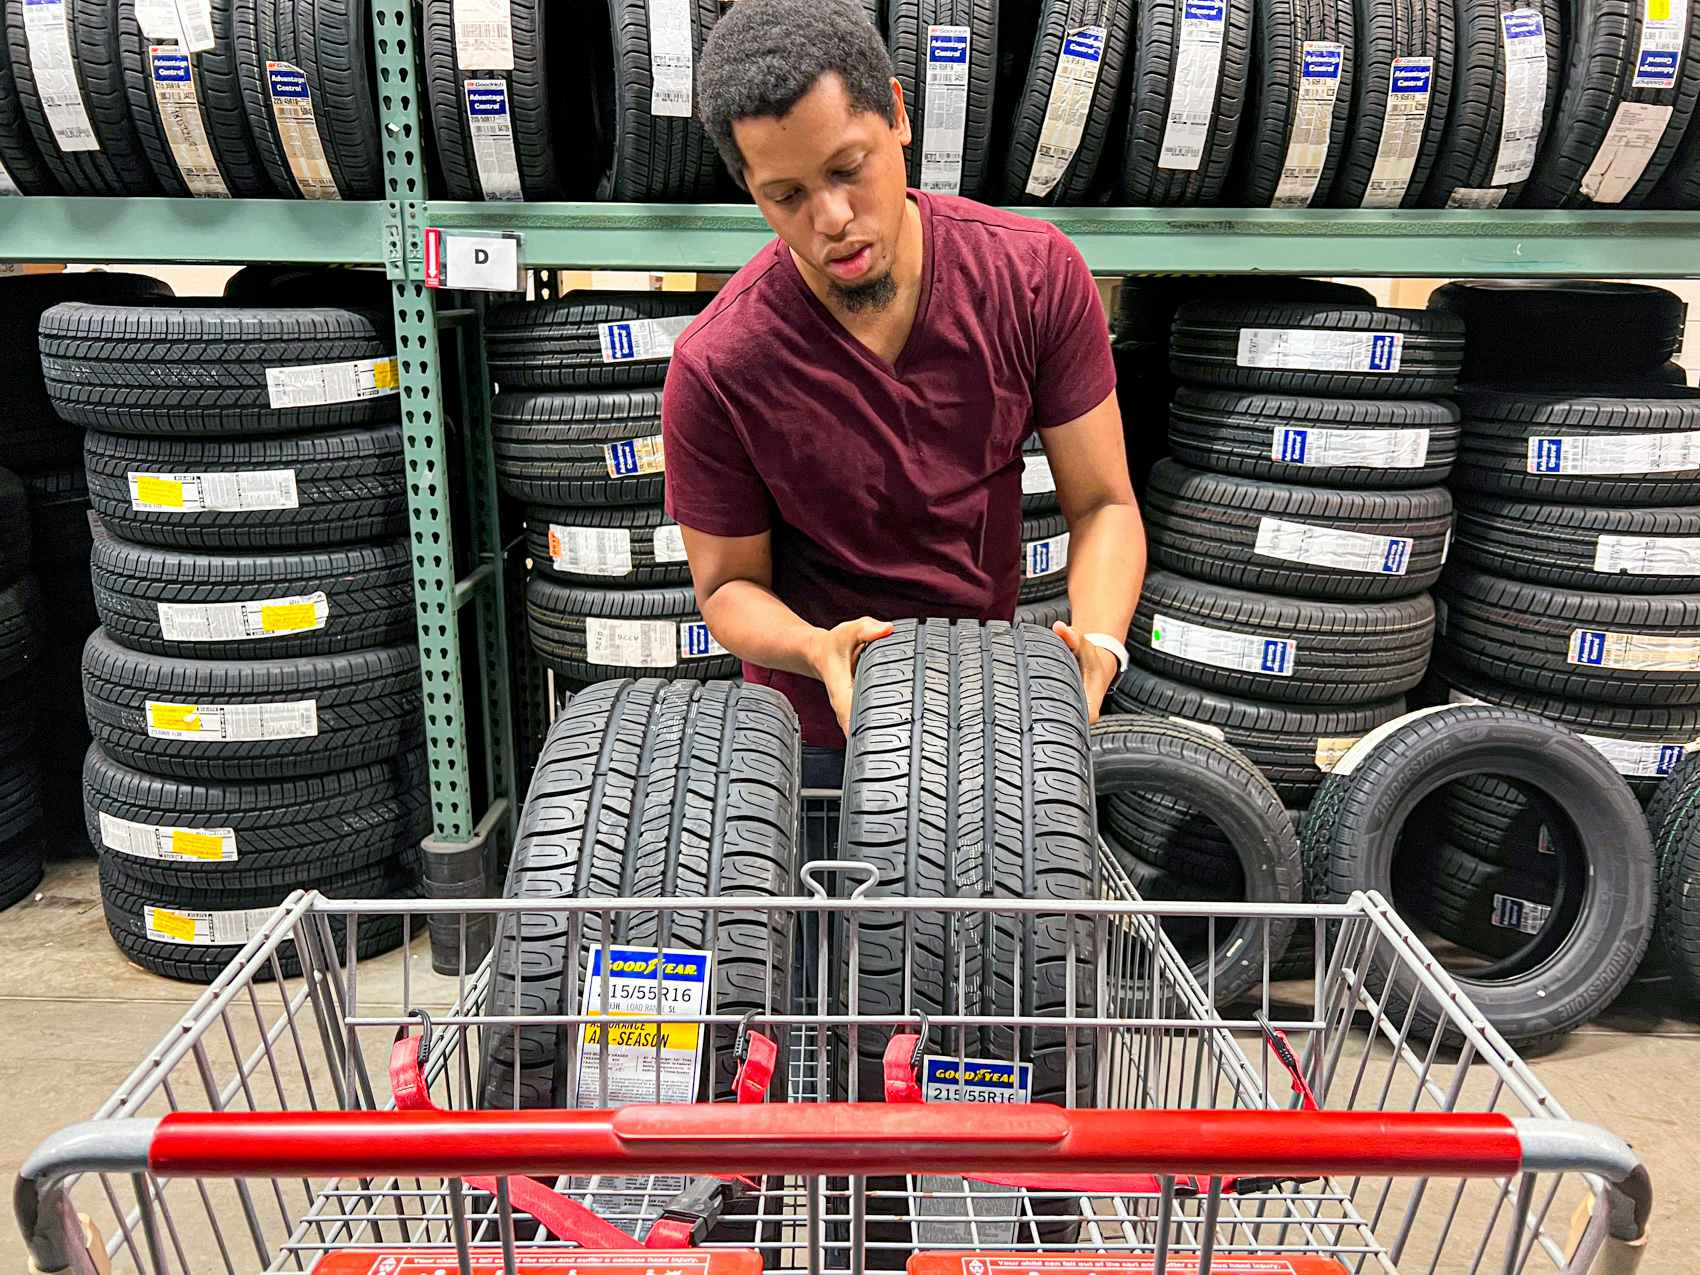 Person placing two tires into a Bj's shopping cart